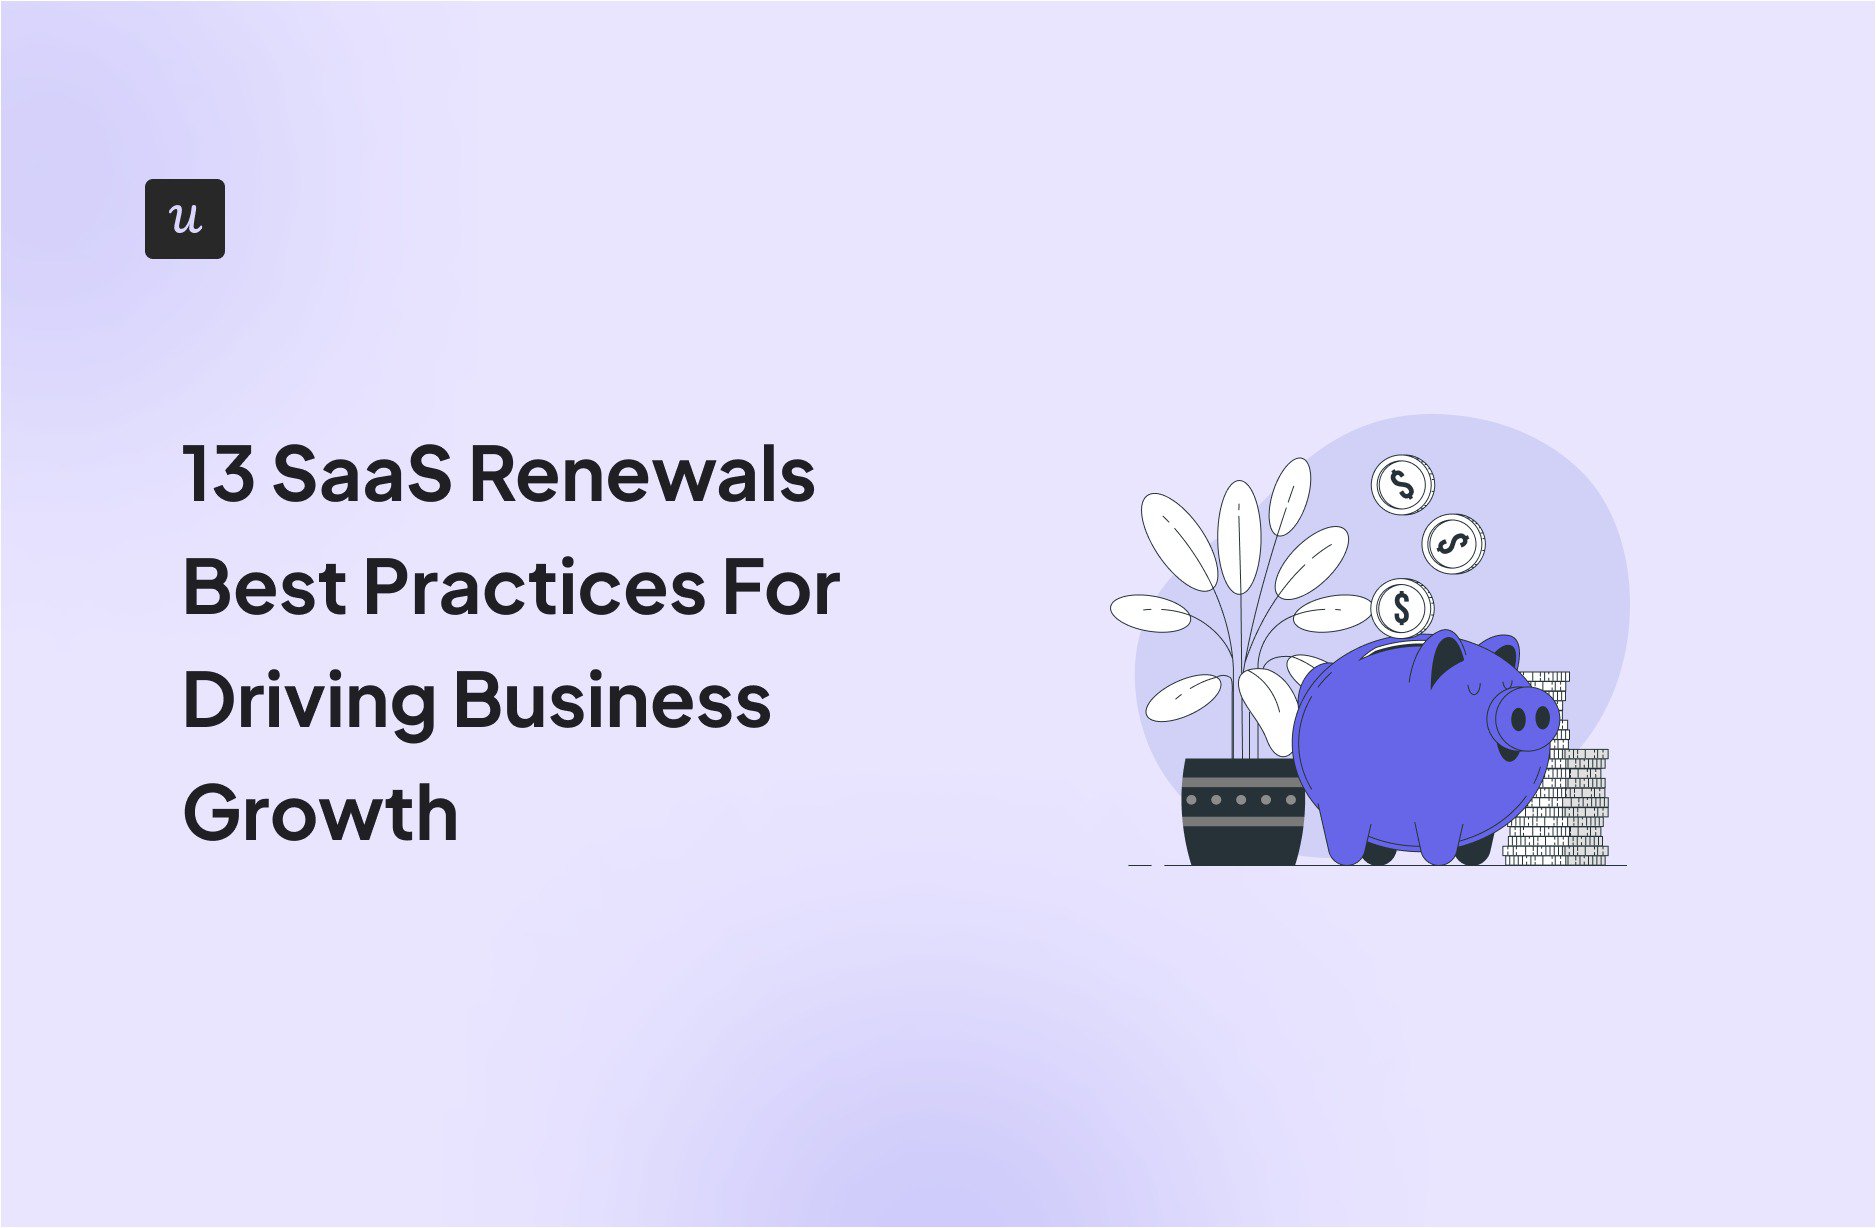 13 SaaS Renewals Best Practices For Driving Business Growth cover